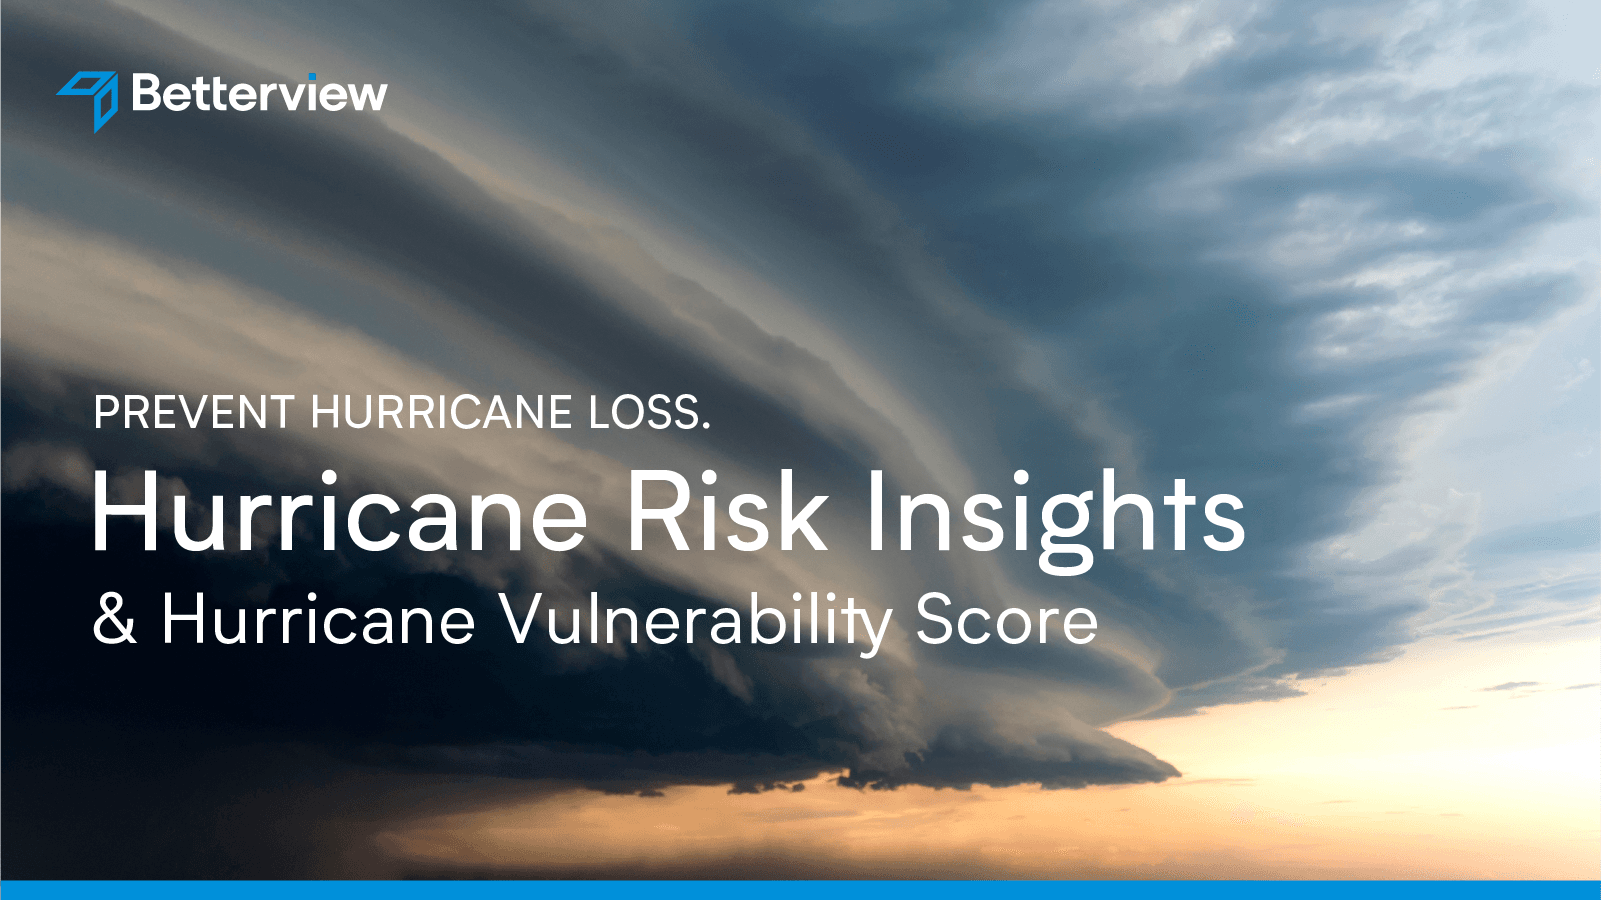 Product Betterview: Hurricane Risk Insights image